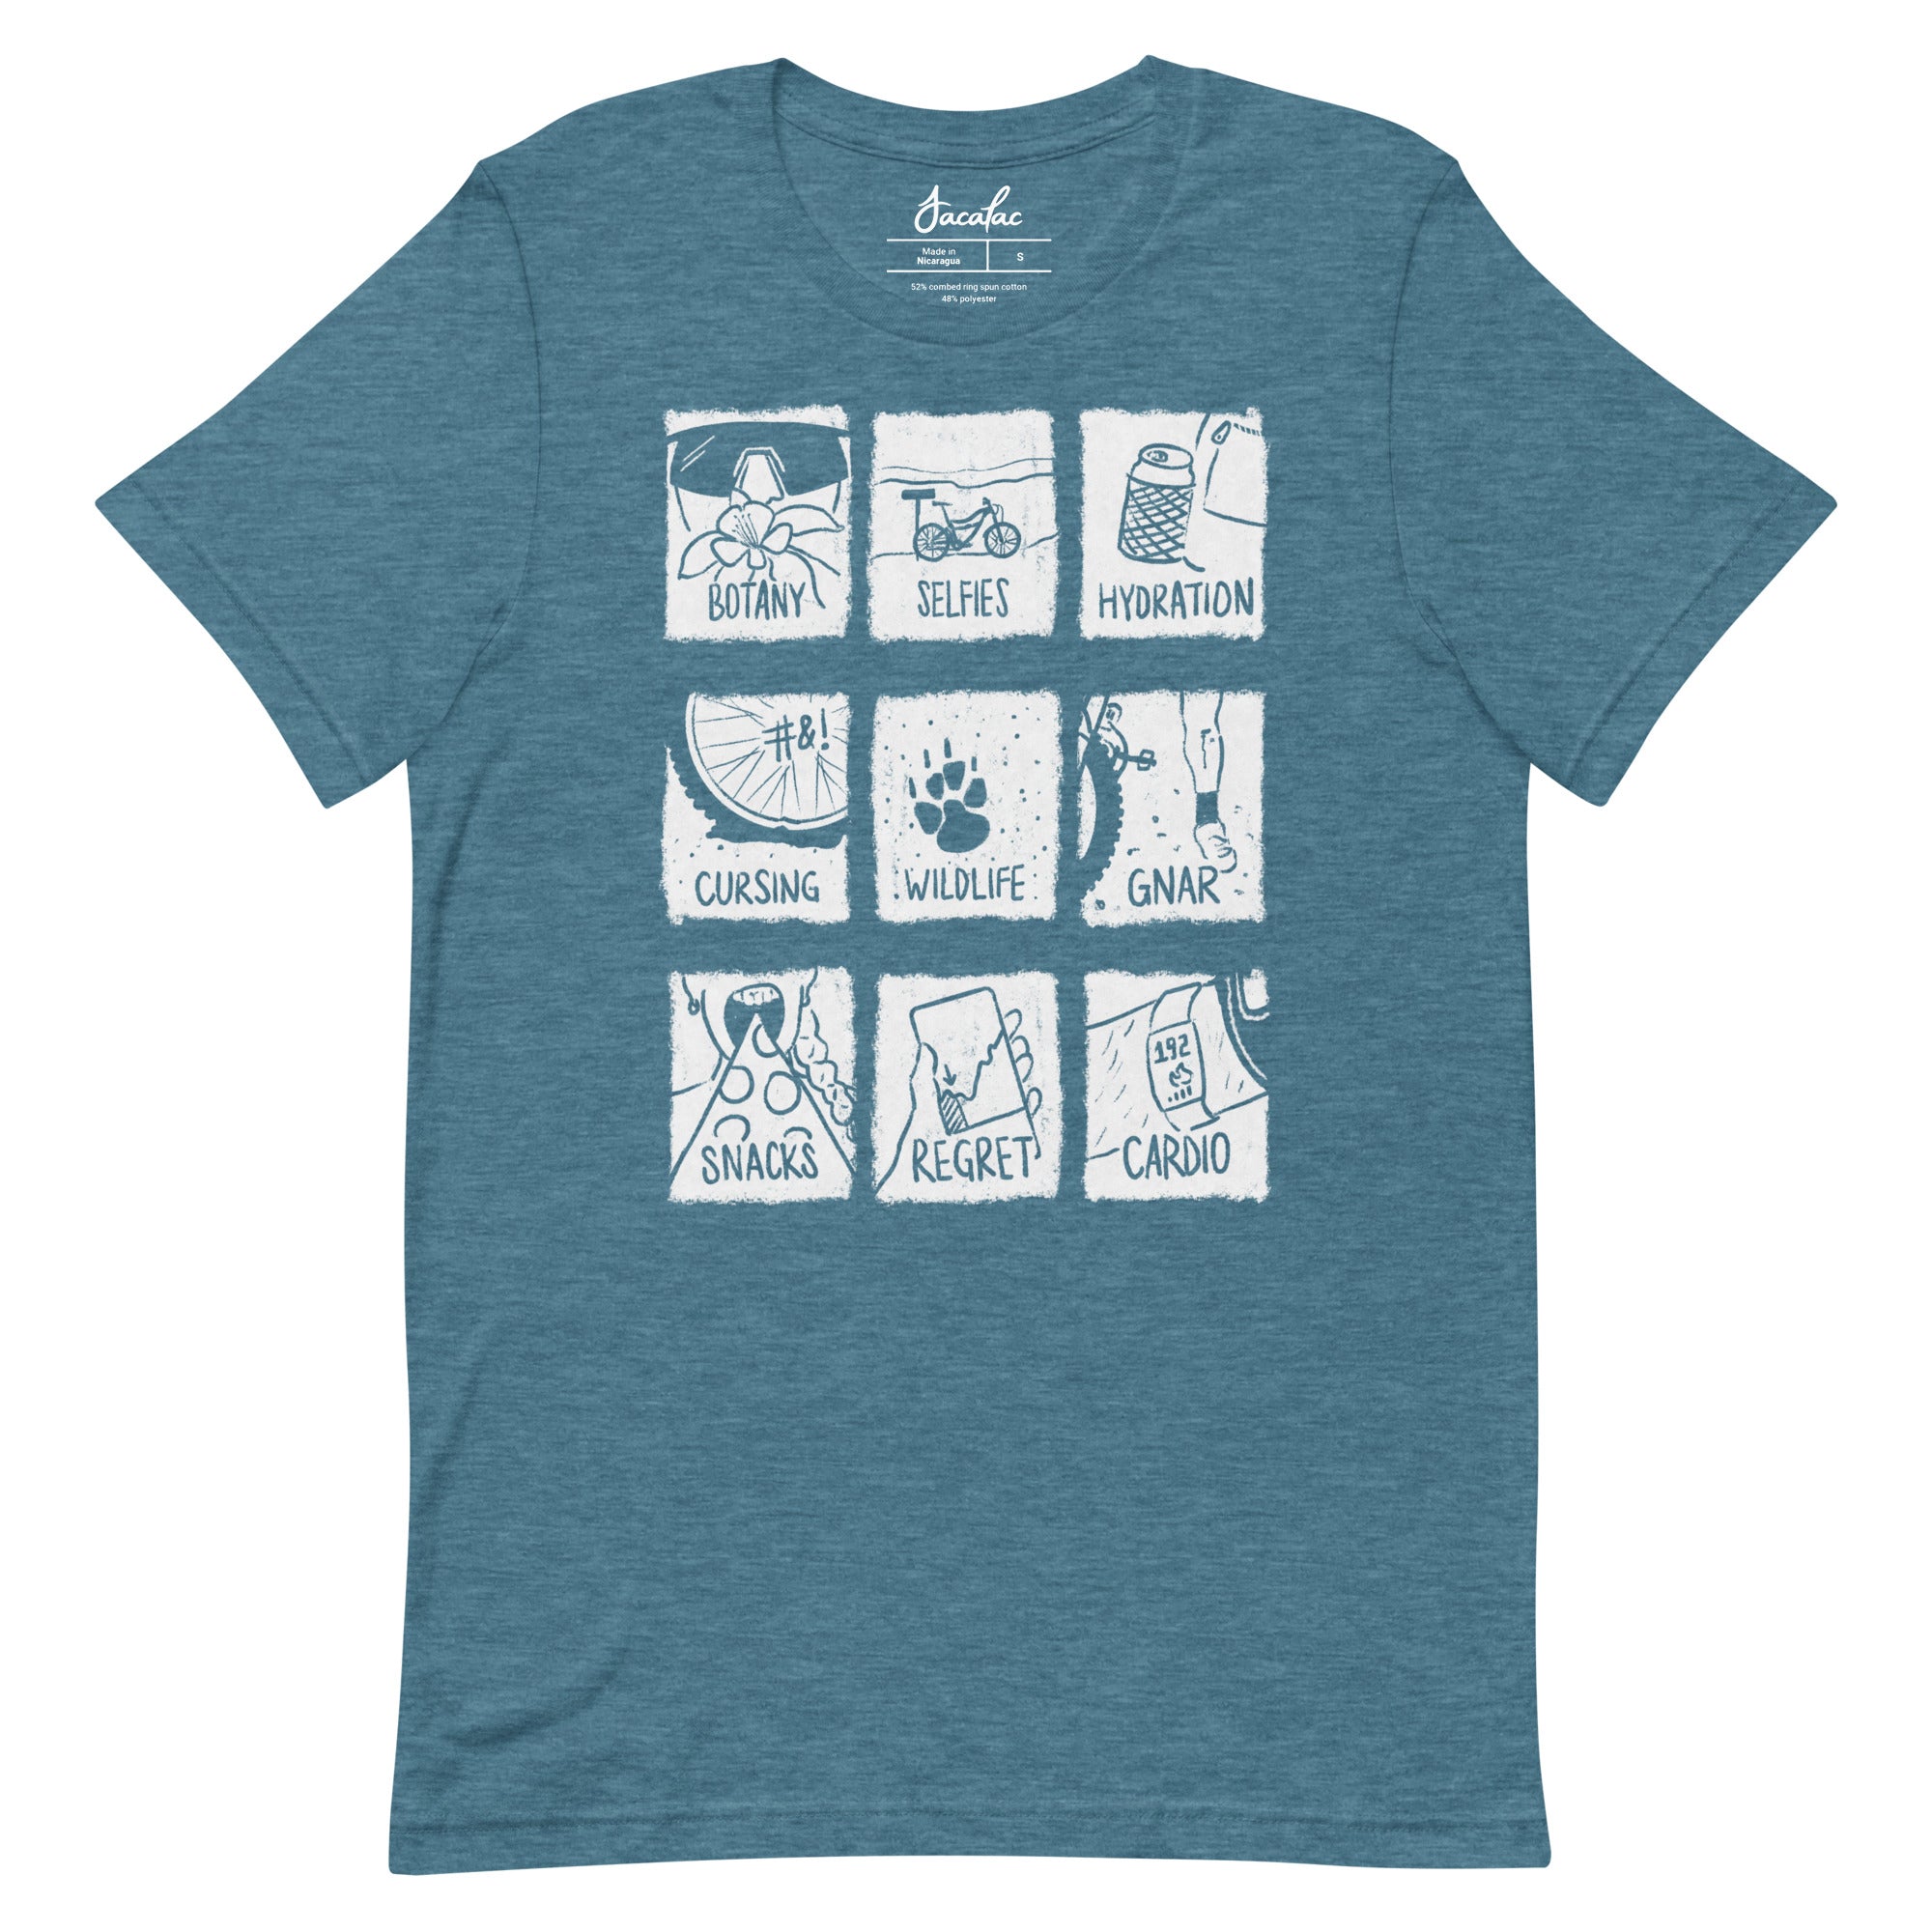 MTB Highs (and Lows) T-shirt